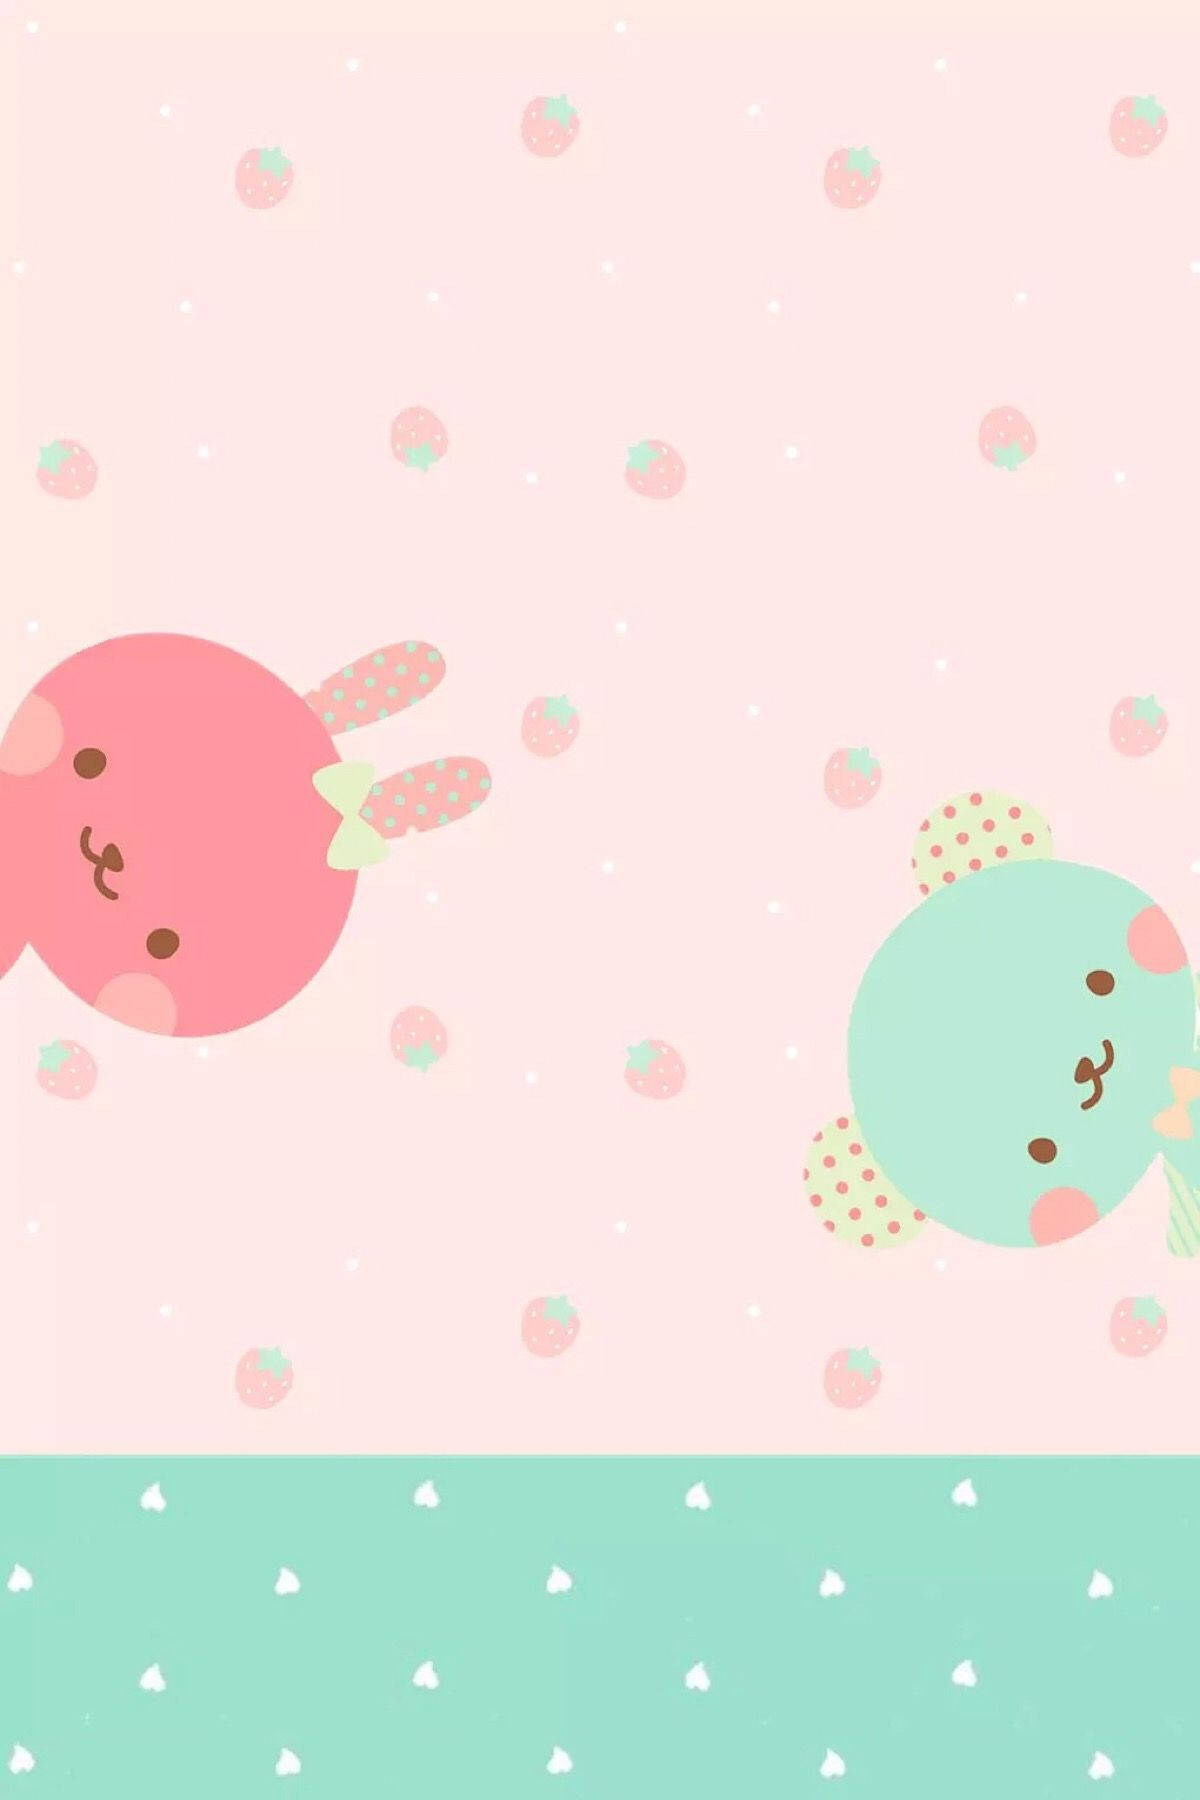 Cute Pink Rabbit And Green Bear Background